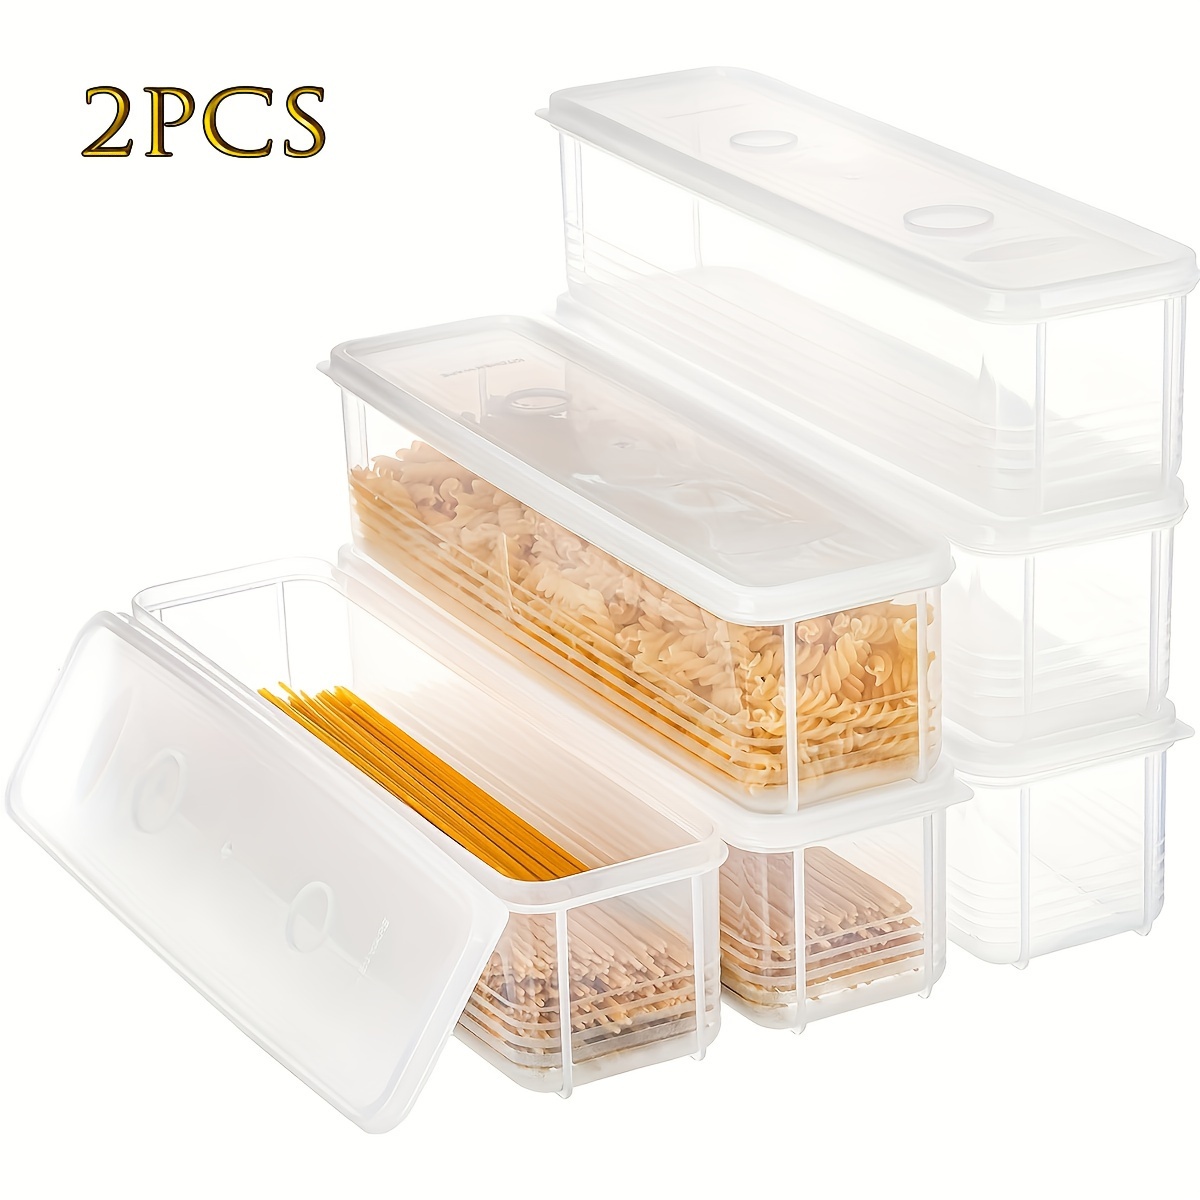 Pizza Storage Container Collapsible,Expandable Pizza Slice Container With  lid Silicone Adjustable leftover - AliExpress